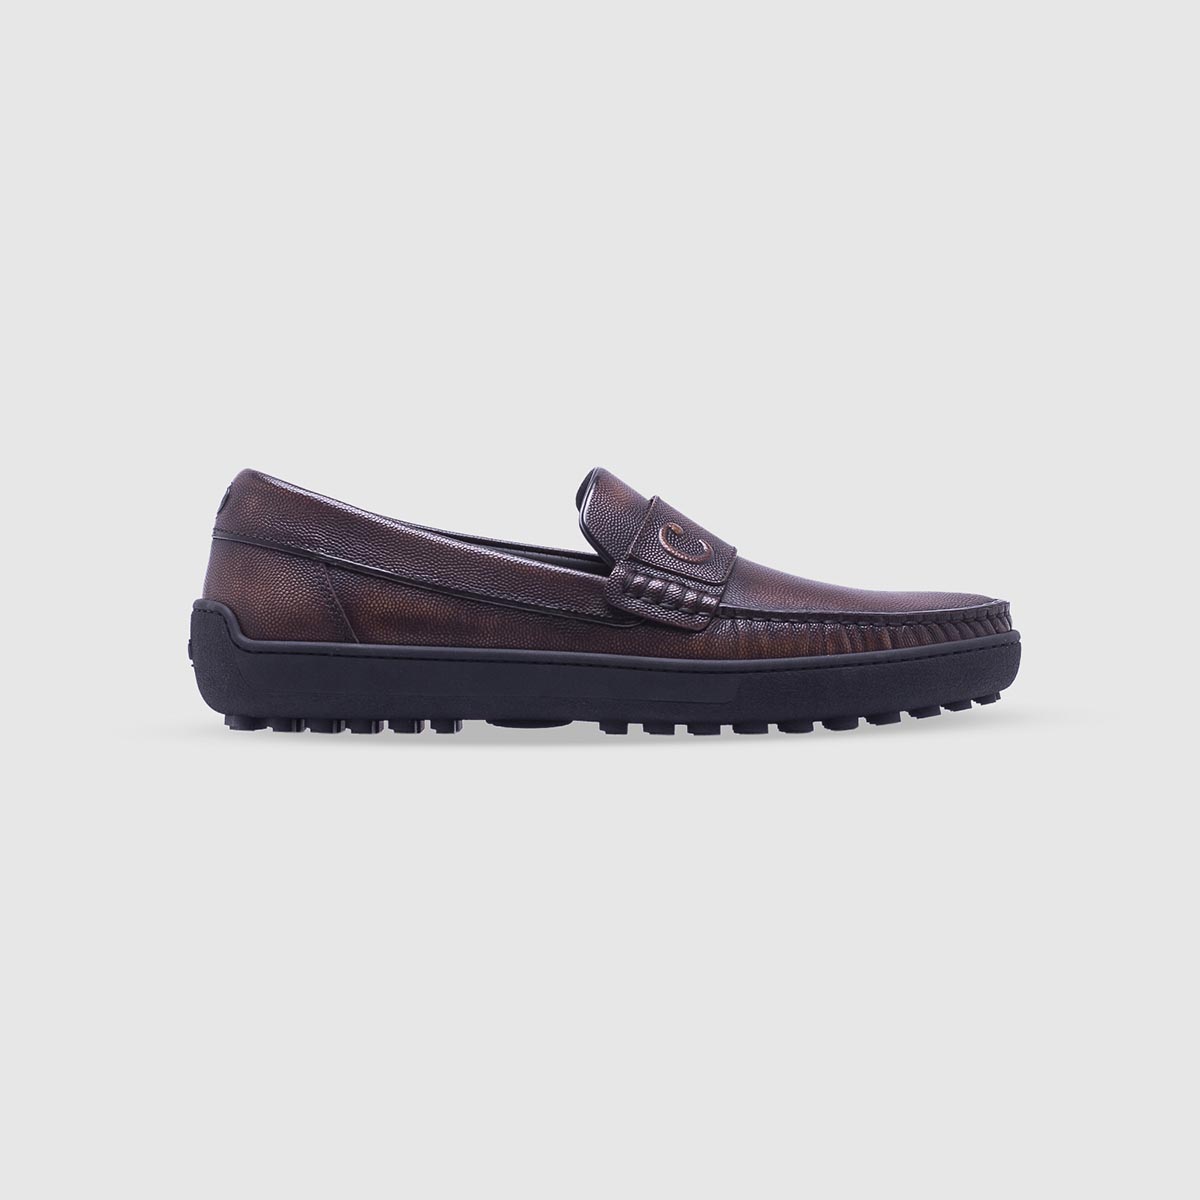 Dark brown loafer in tumbled calf leather